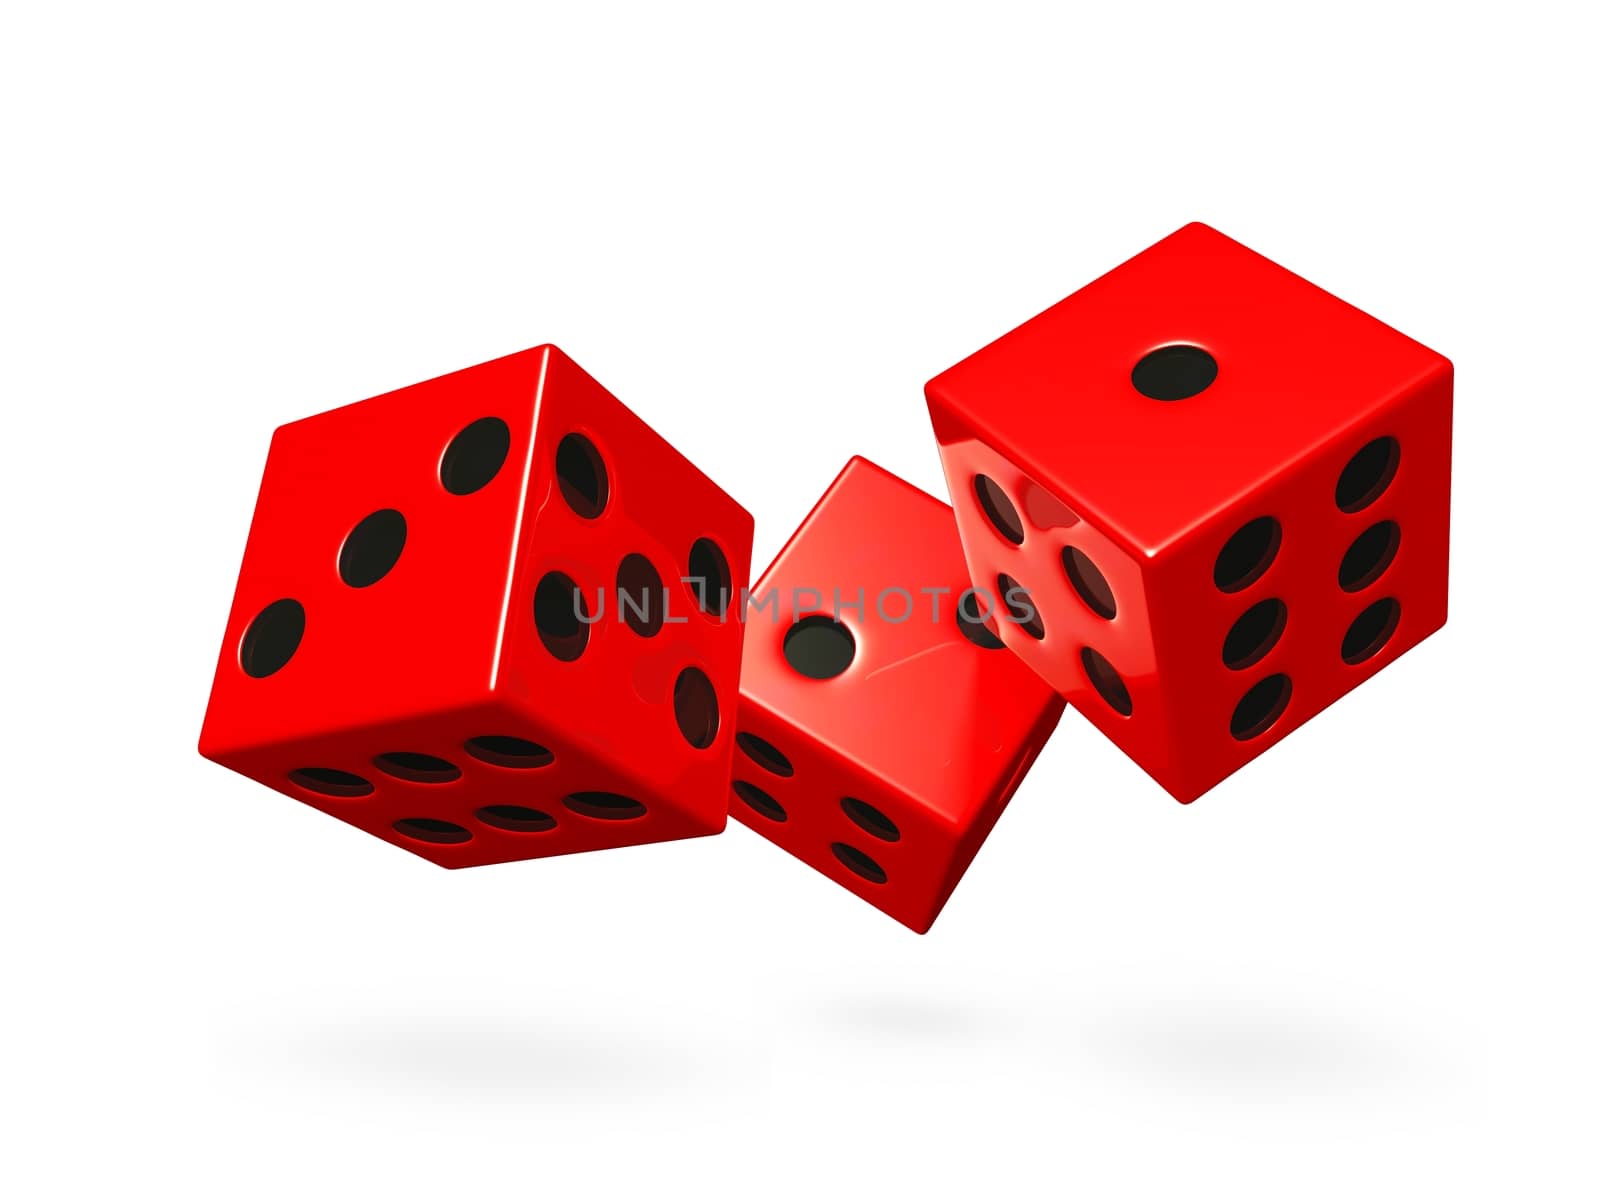 Three shiny red game dice rolling or falling down. This 3d render will find use in gaming, casino, gambling and fate concepts.
